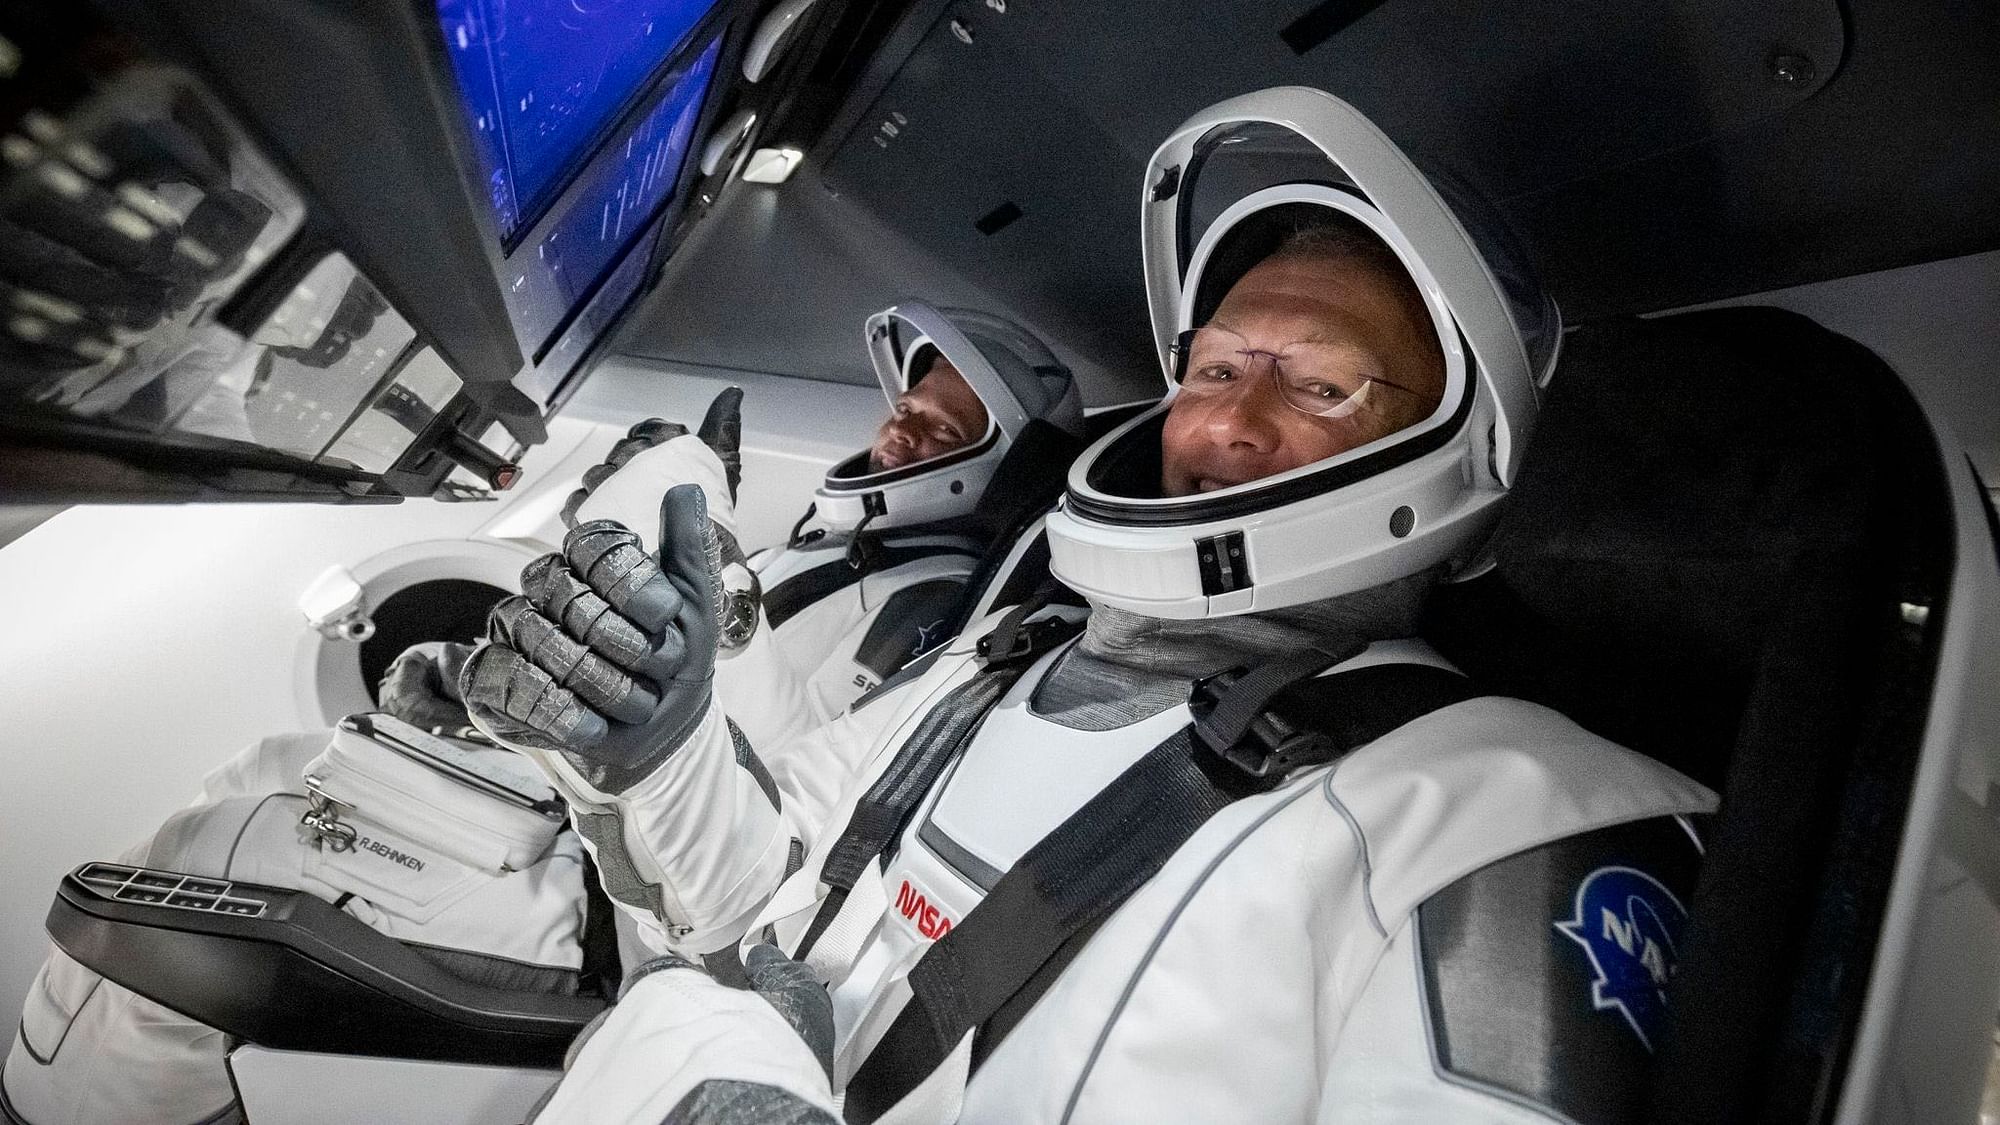 Scripting a historic chapter for the US space programme, Elon Musk-run SpaceX on Saturday, 31 May sent two NASA astronauts to the International Space Station (ISS) onboard the reusable Falcon 9 rocket.